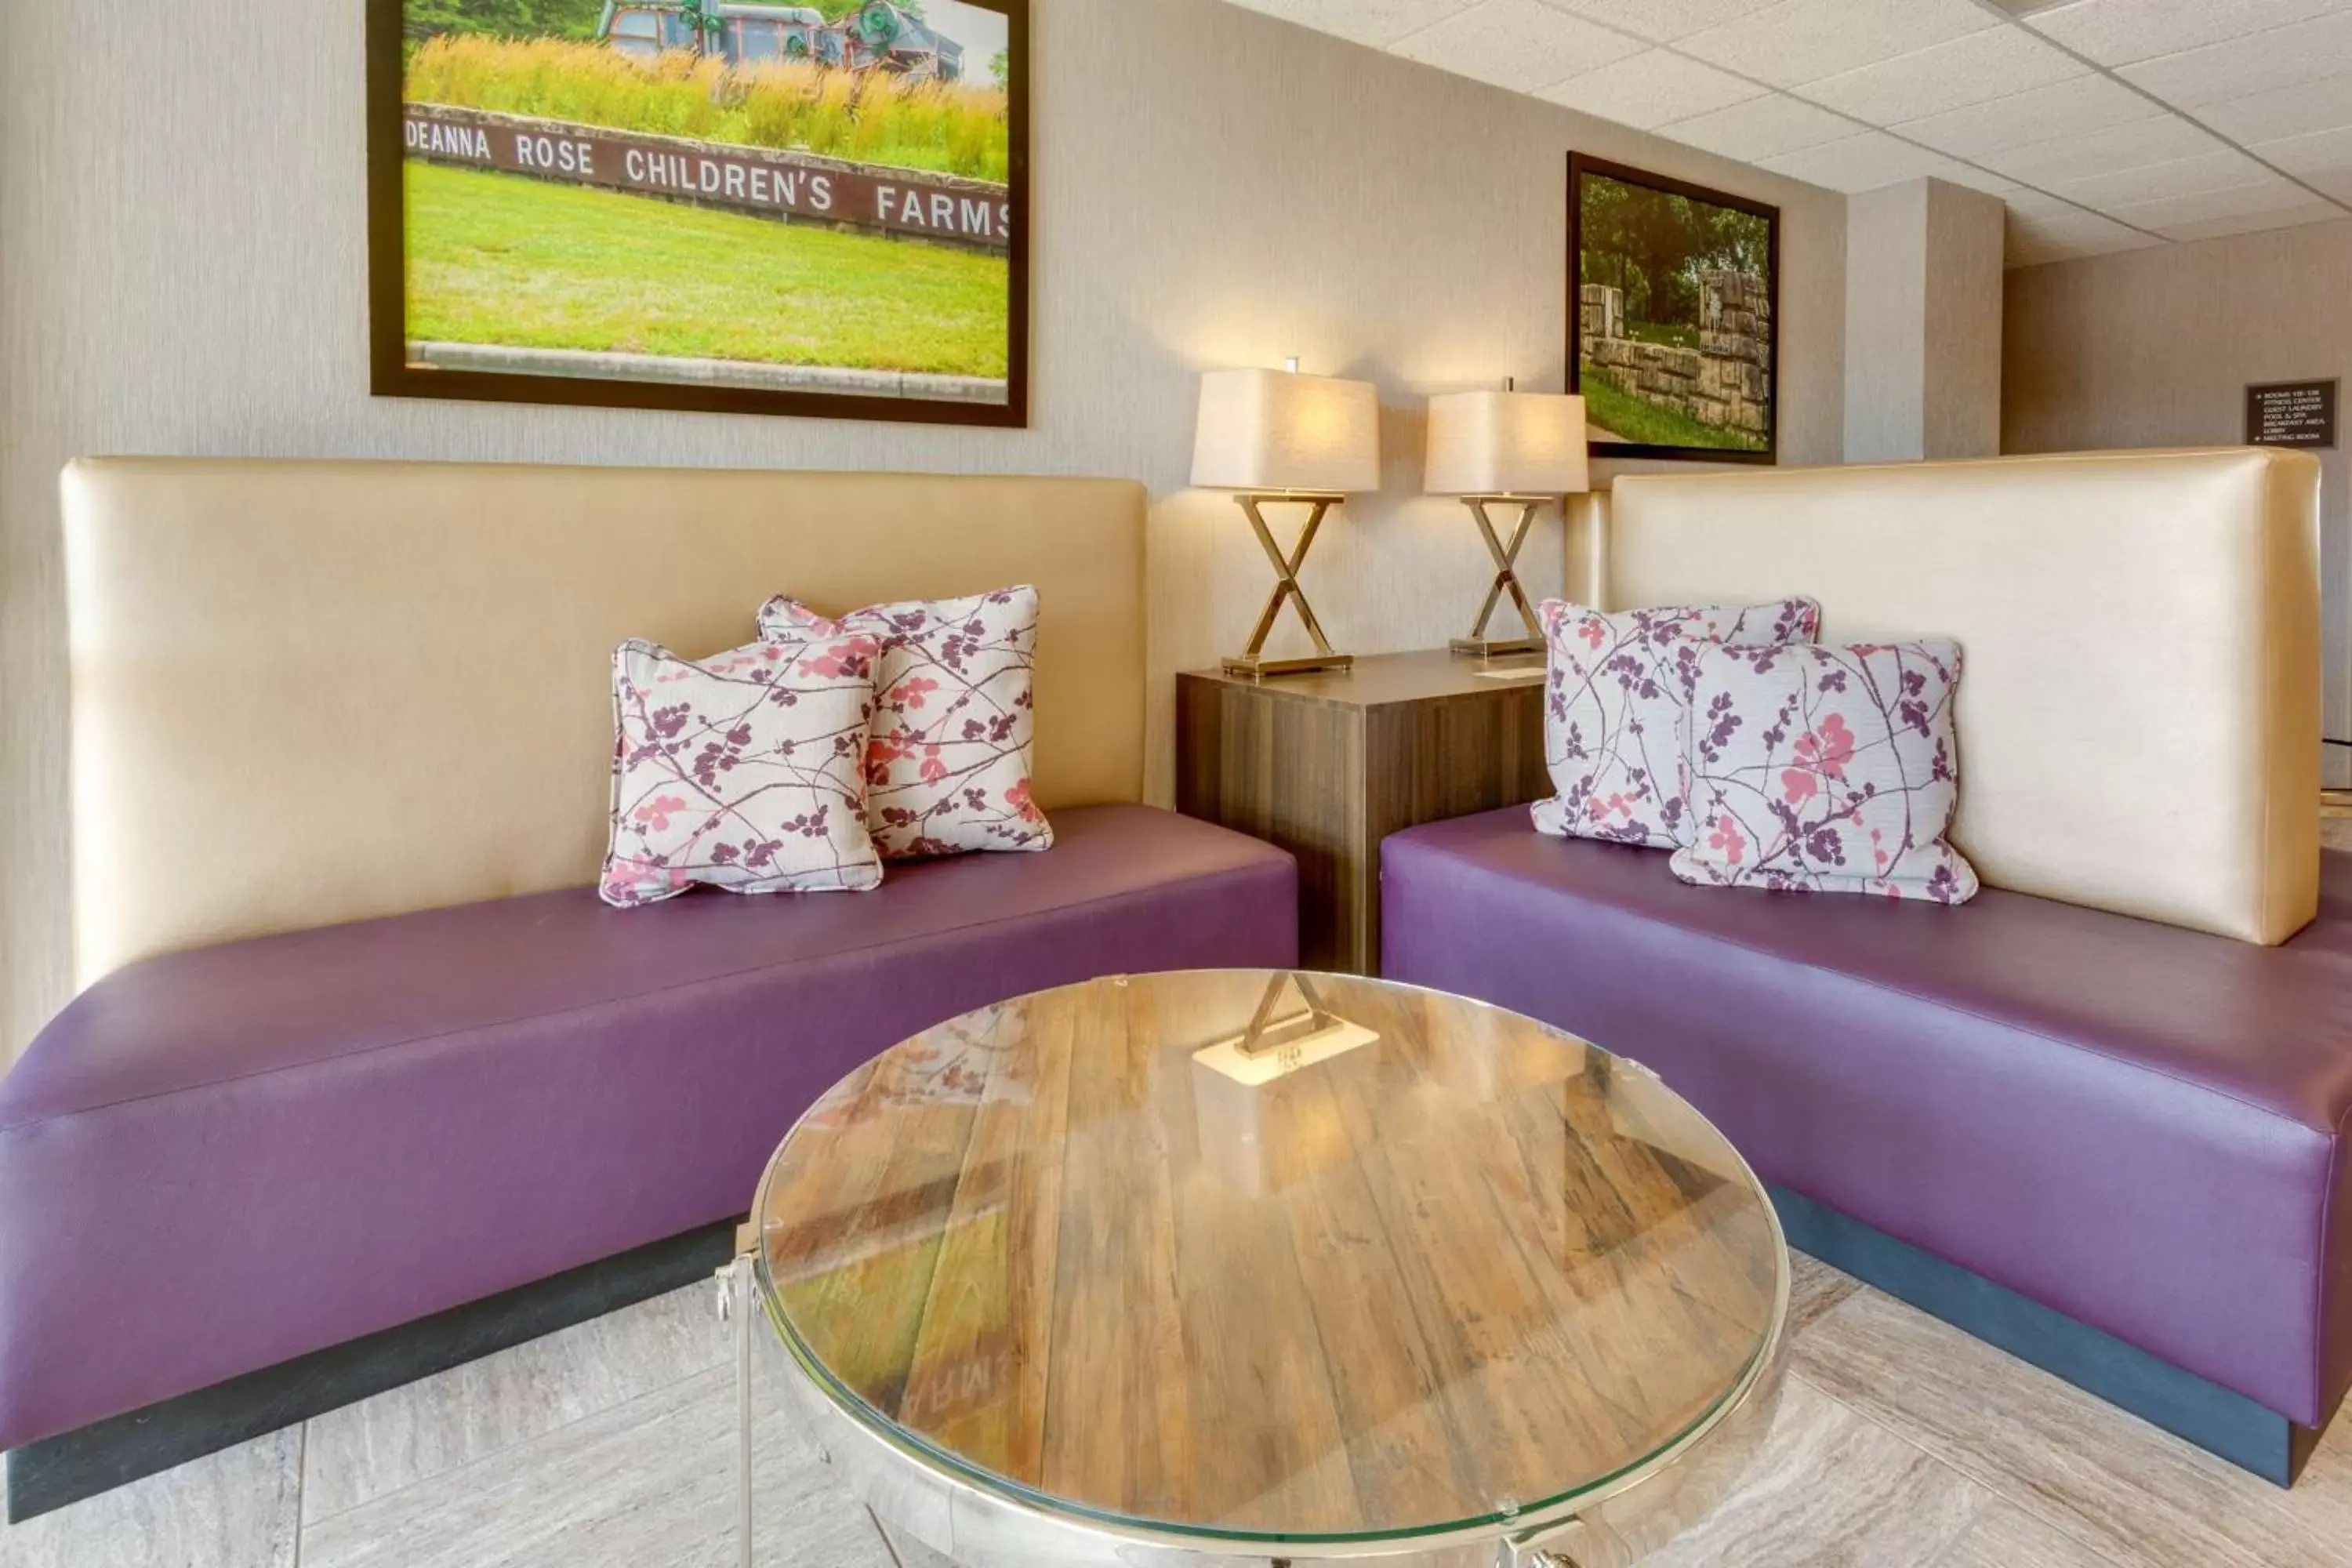 Lobby or reception in Drury Inn & Suites Overland Park